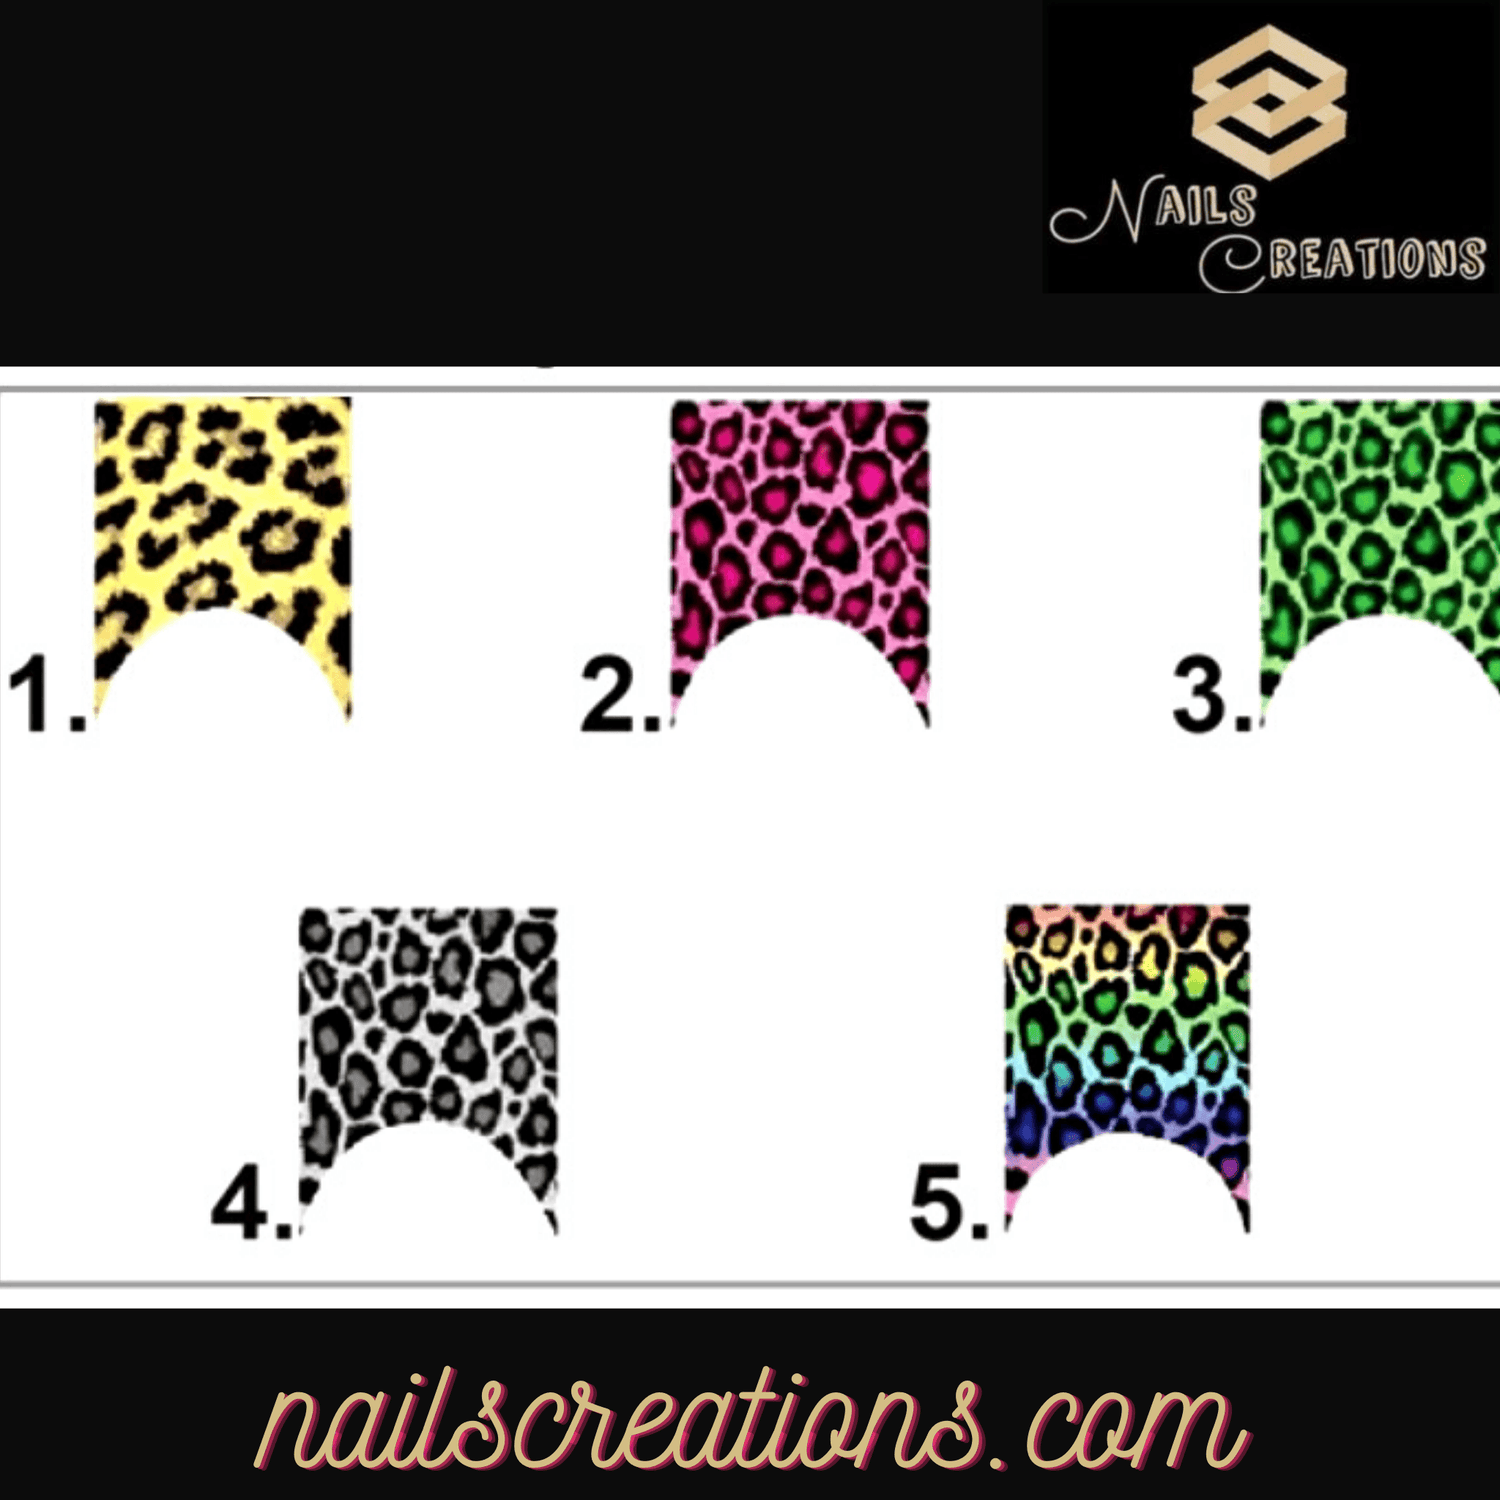 Leopard Print Set of 10 Waterslide Nail Decals Tips - Nails Creations